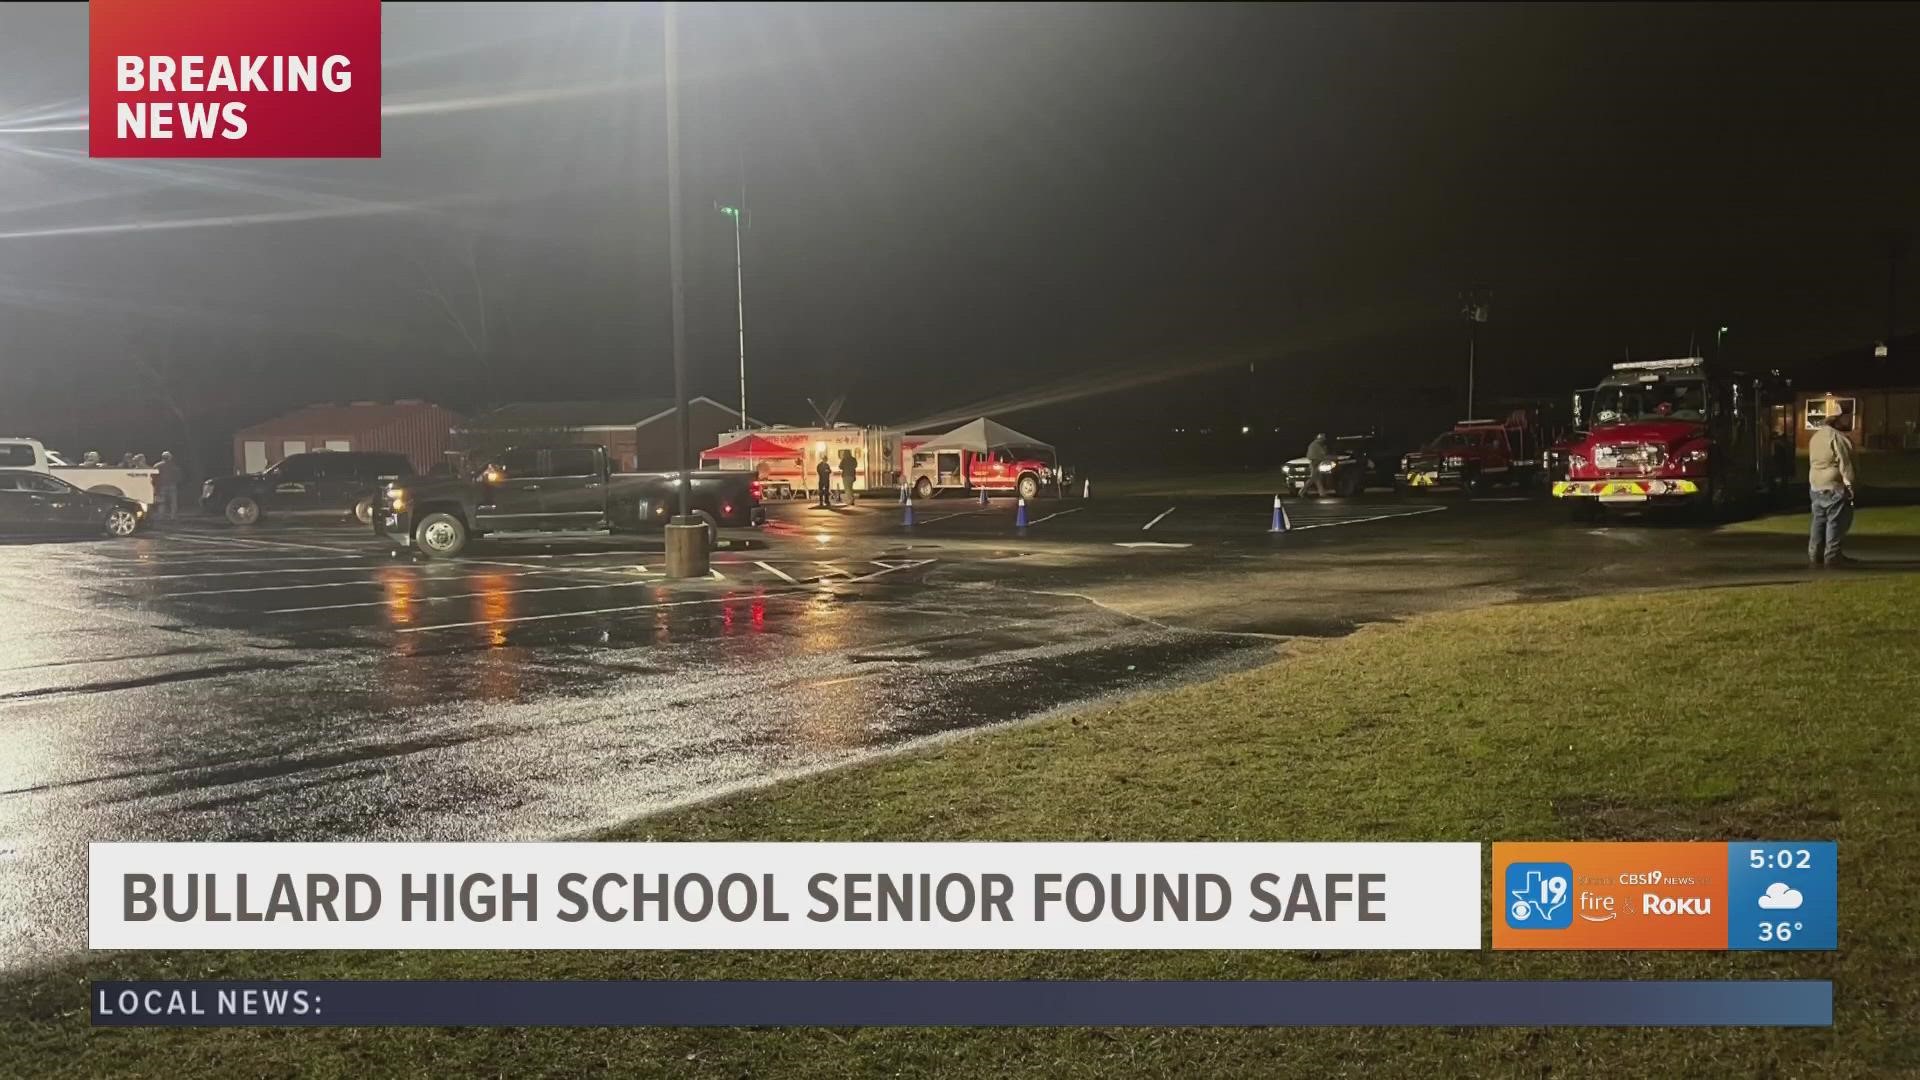 According to Bullard Police Department Chief Jeff Bragg, the 18-year-old was found just north of Bullard early Friday morning.